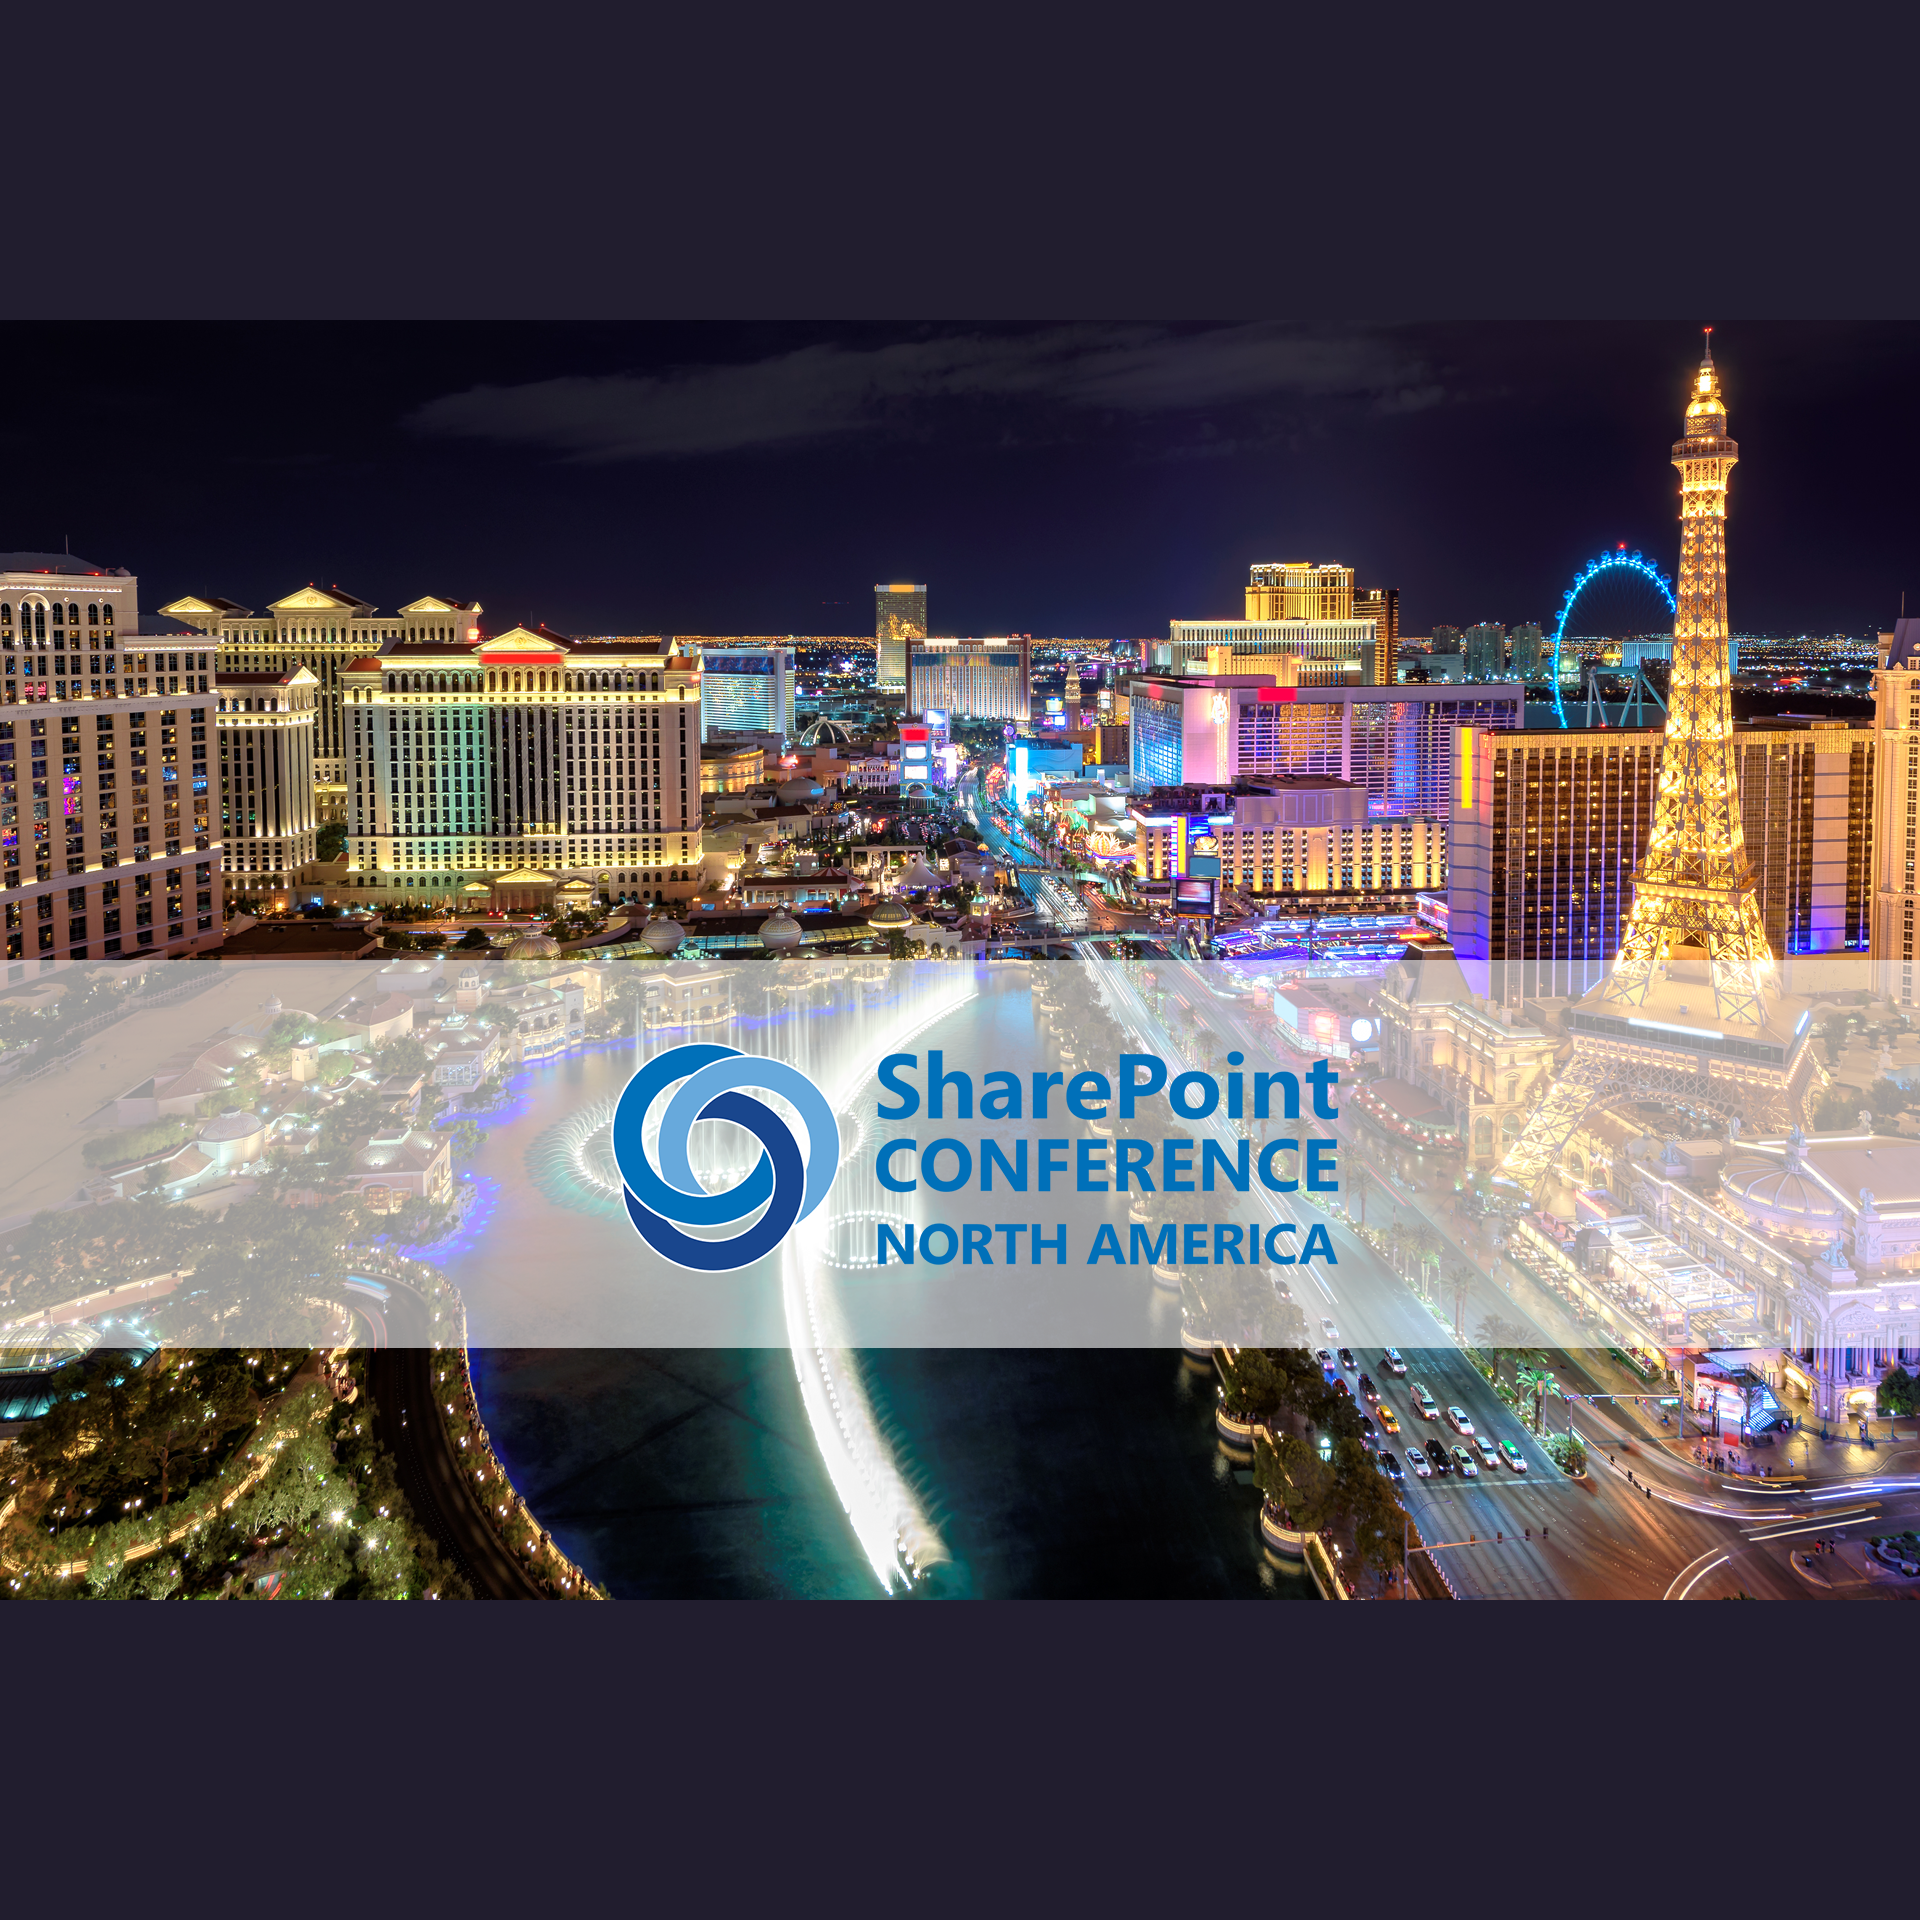 Join AxioWorks at SharePoint Conference North America in Las Vegas!